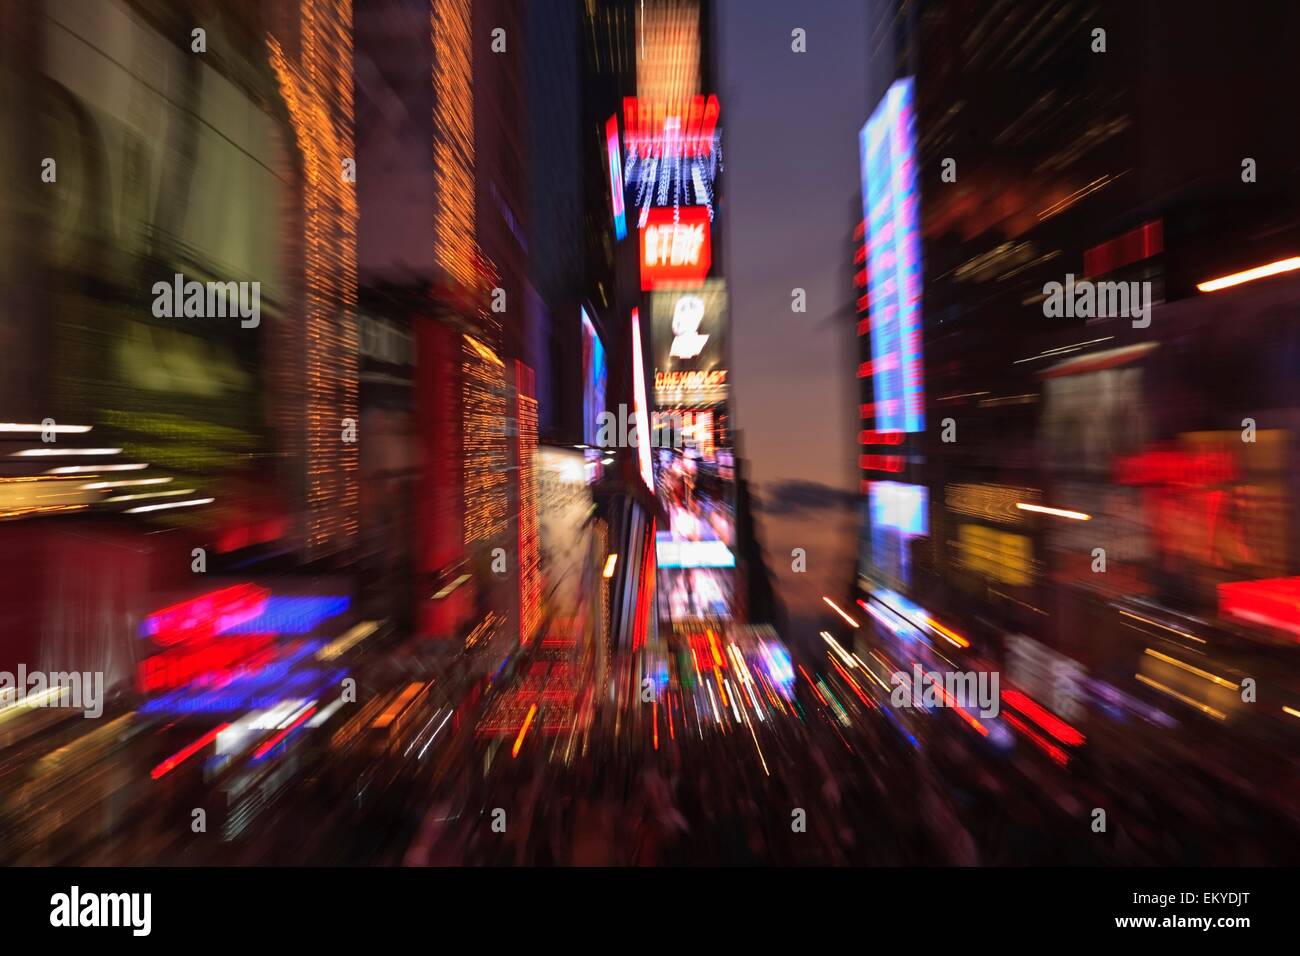 Zoomed Effect Of The Lights At Times Square; Manhattan, New York City, New York, Usa Stock Photo